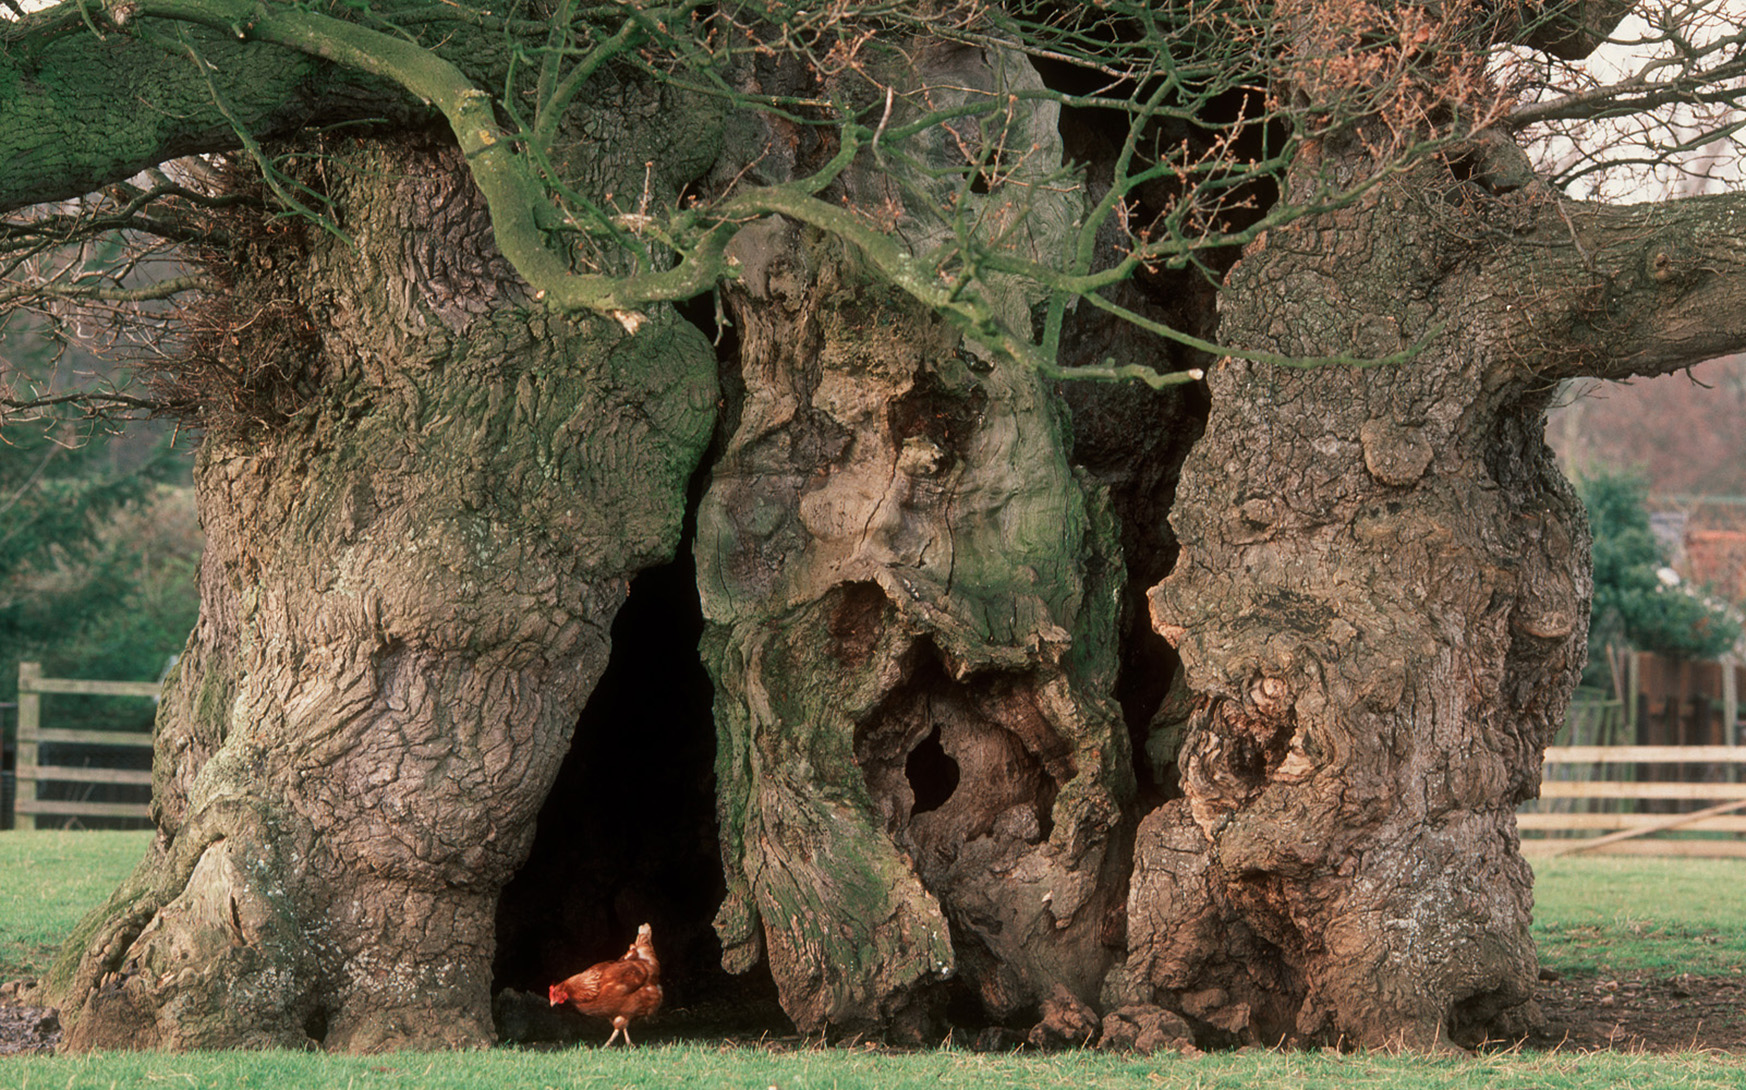 A huge tree with gnarled bark in a field with a chicken standing in front of it